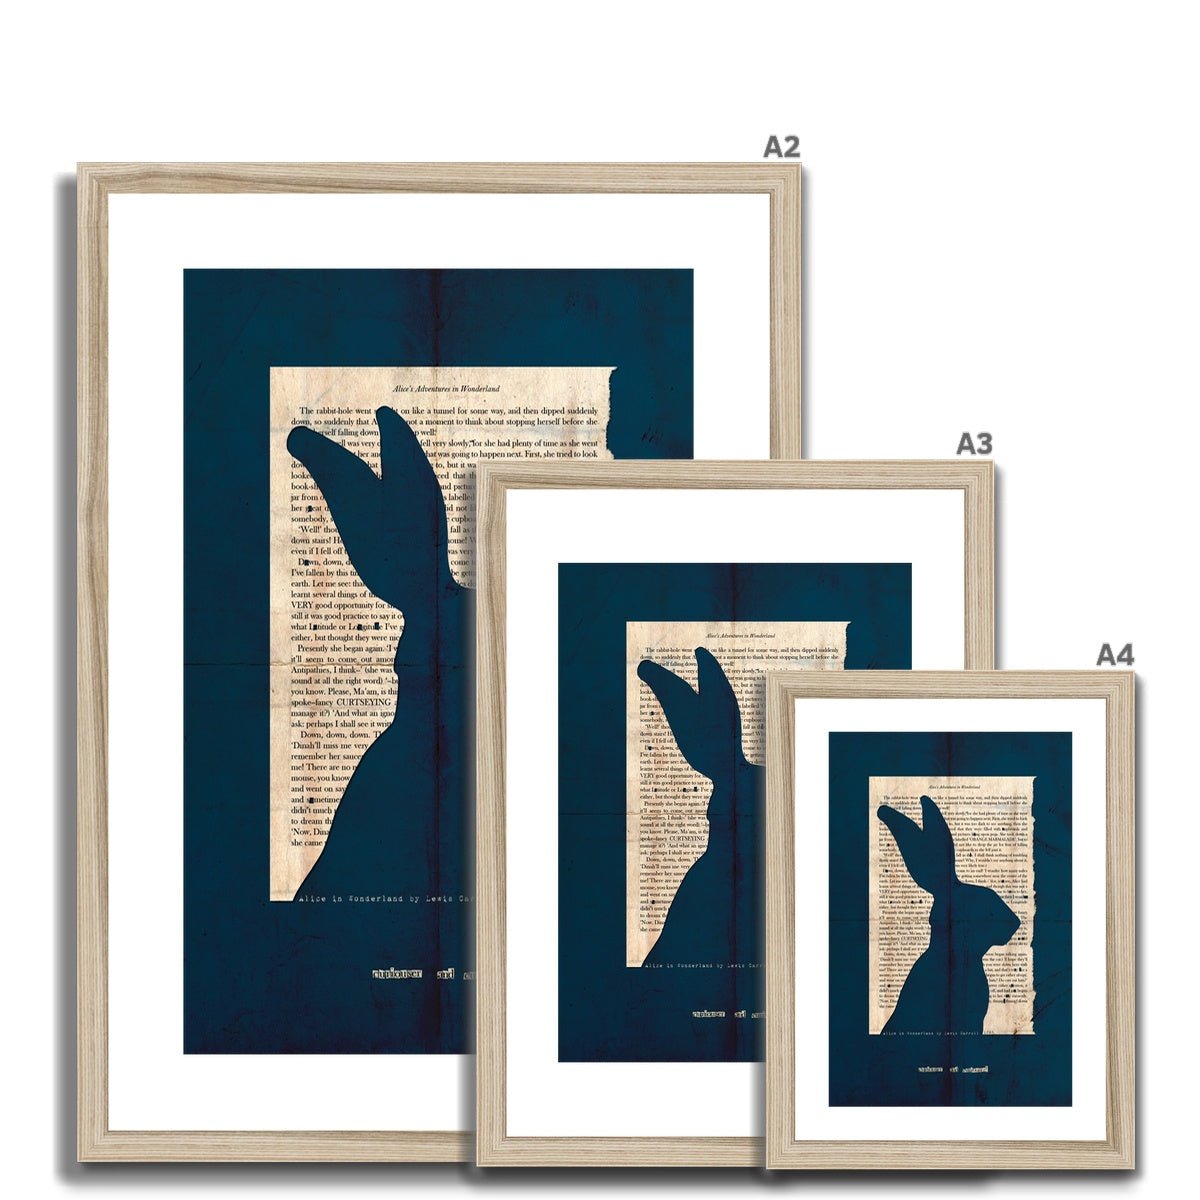 A collection of natural wooden framed fine art prints ranging from A2 to A4 depicting a page from Alice in Wonderland with the silhouette of a Hare cut out on a navy blue background with the line "curiouser and curiouser" also cut out